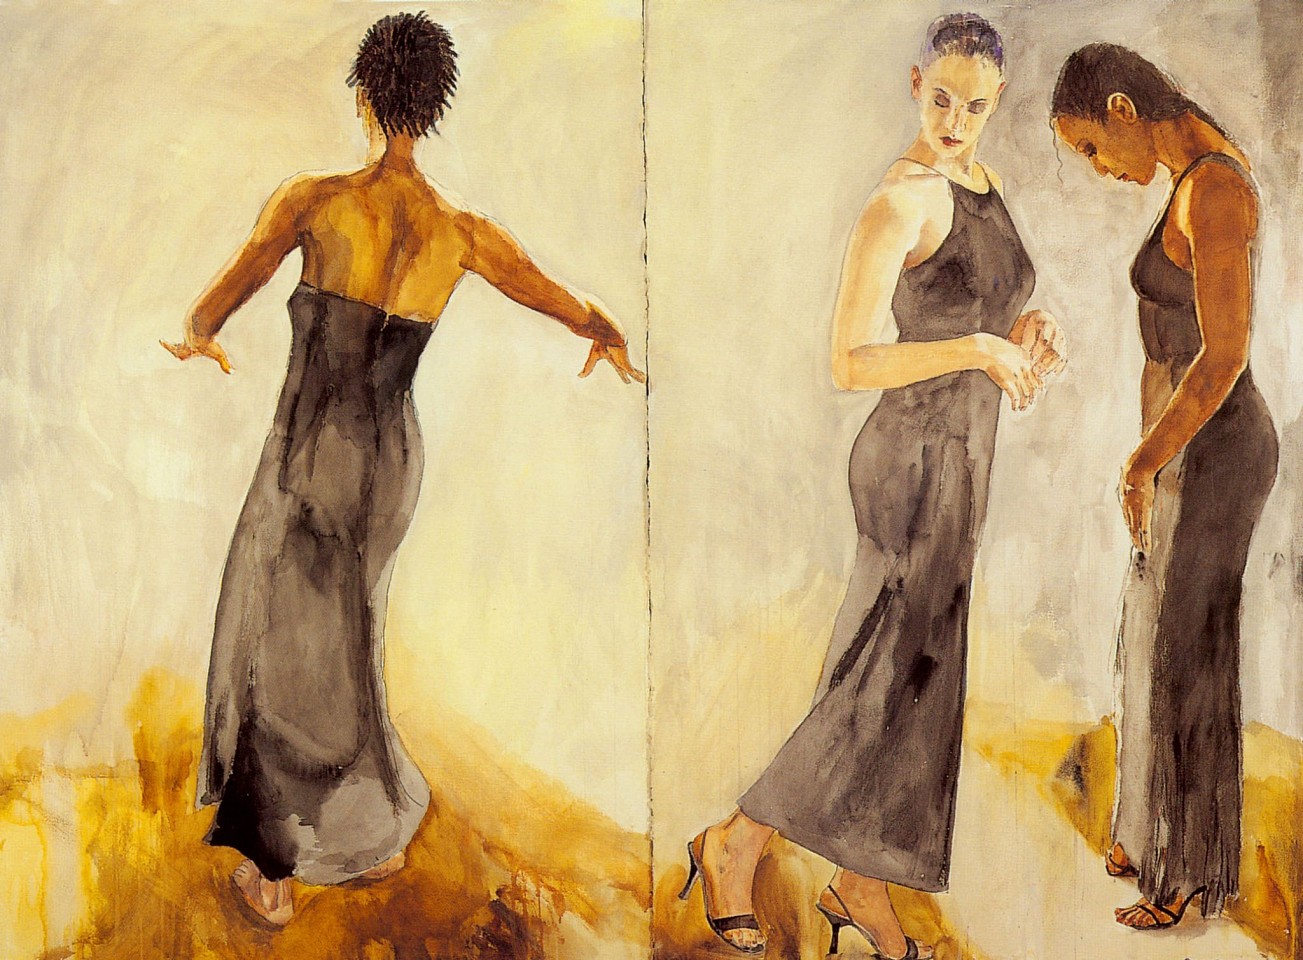 David Remfry, Dancers, 2000
Watercolor on paper, 60 x 80 in.
REMF0062